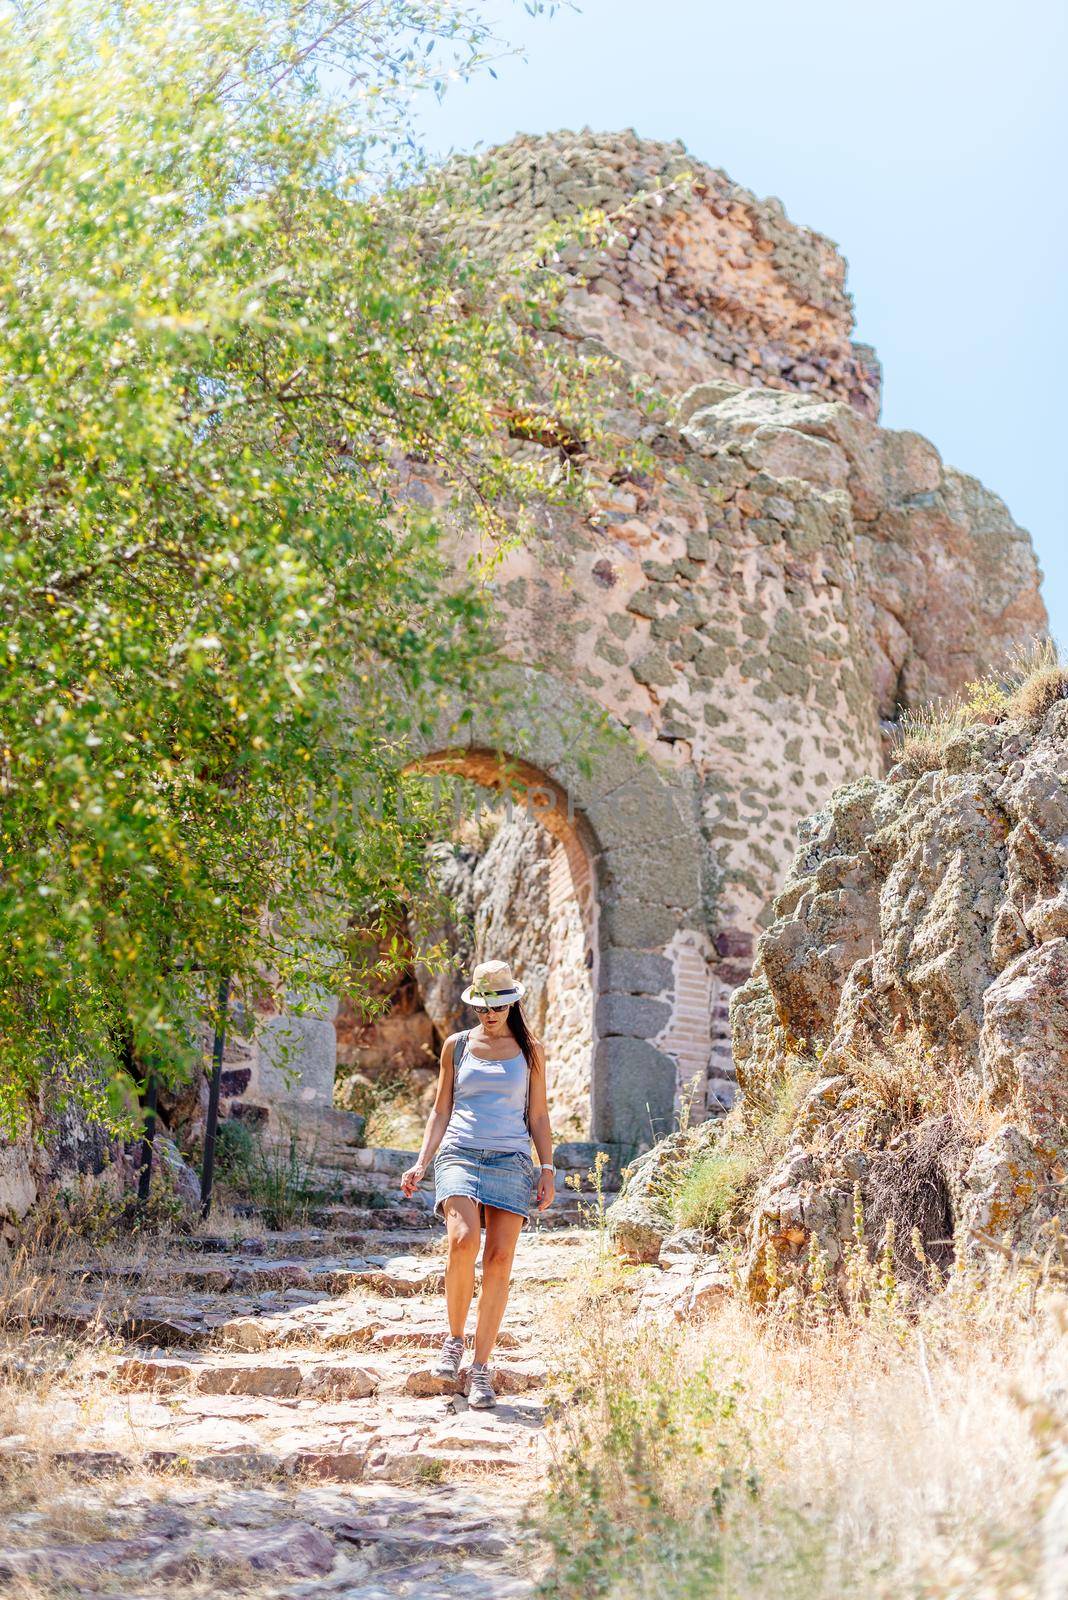 Tourist walking through the arched entrance of a ancient castle by ivanmoreno